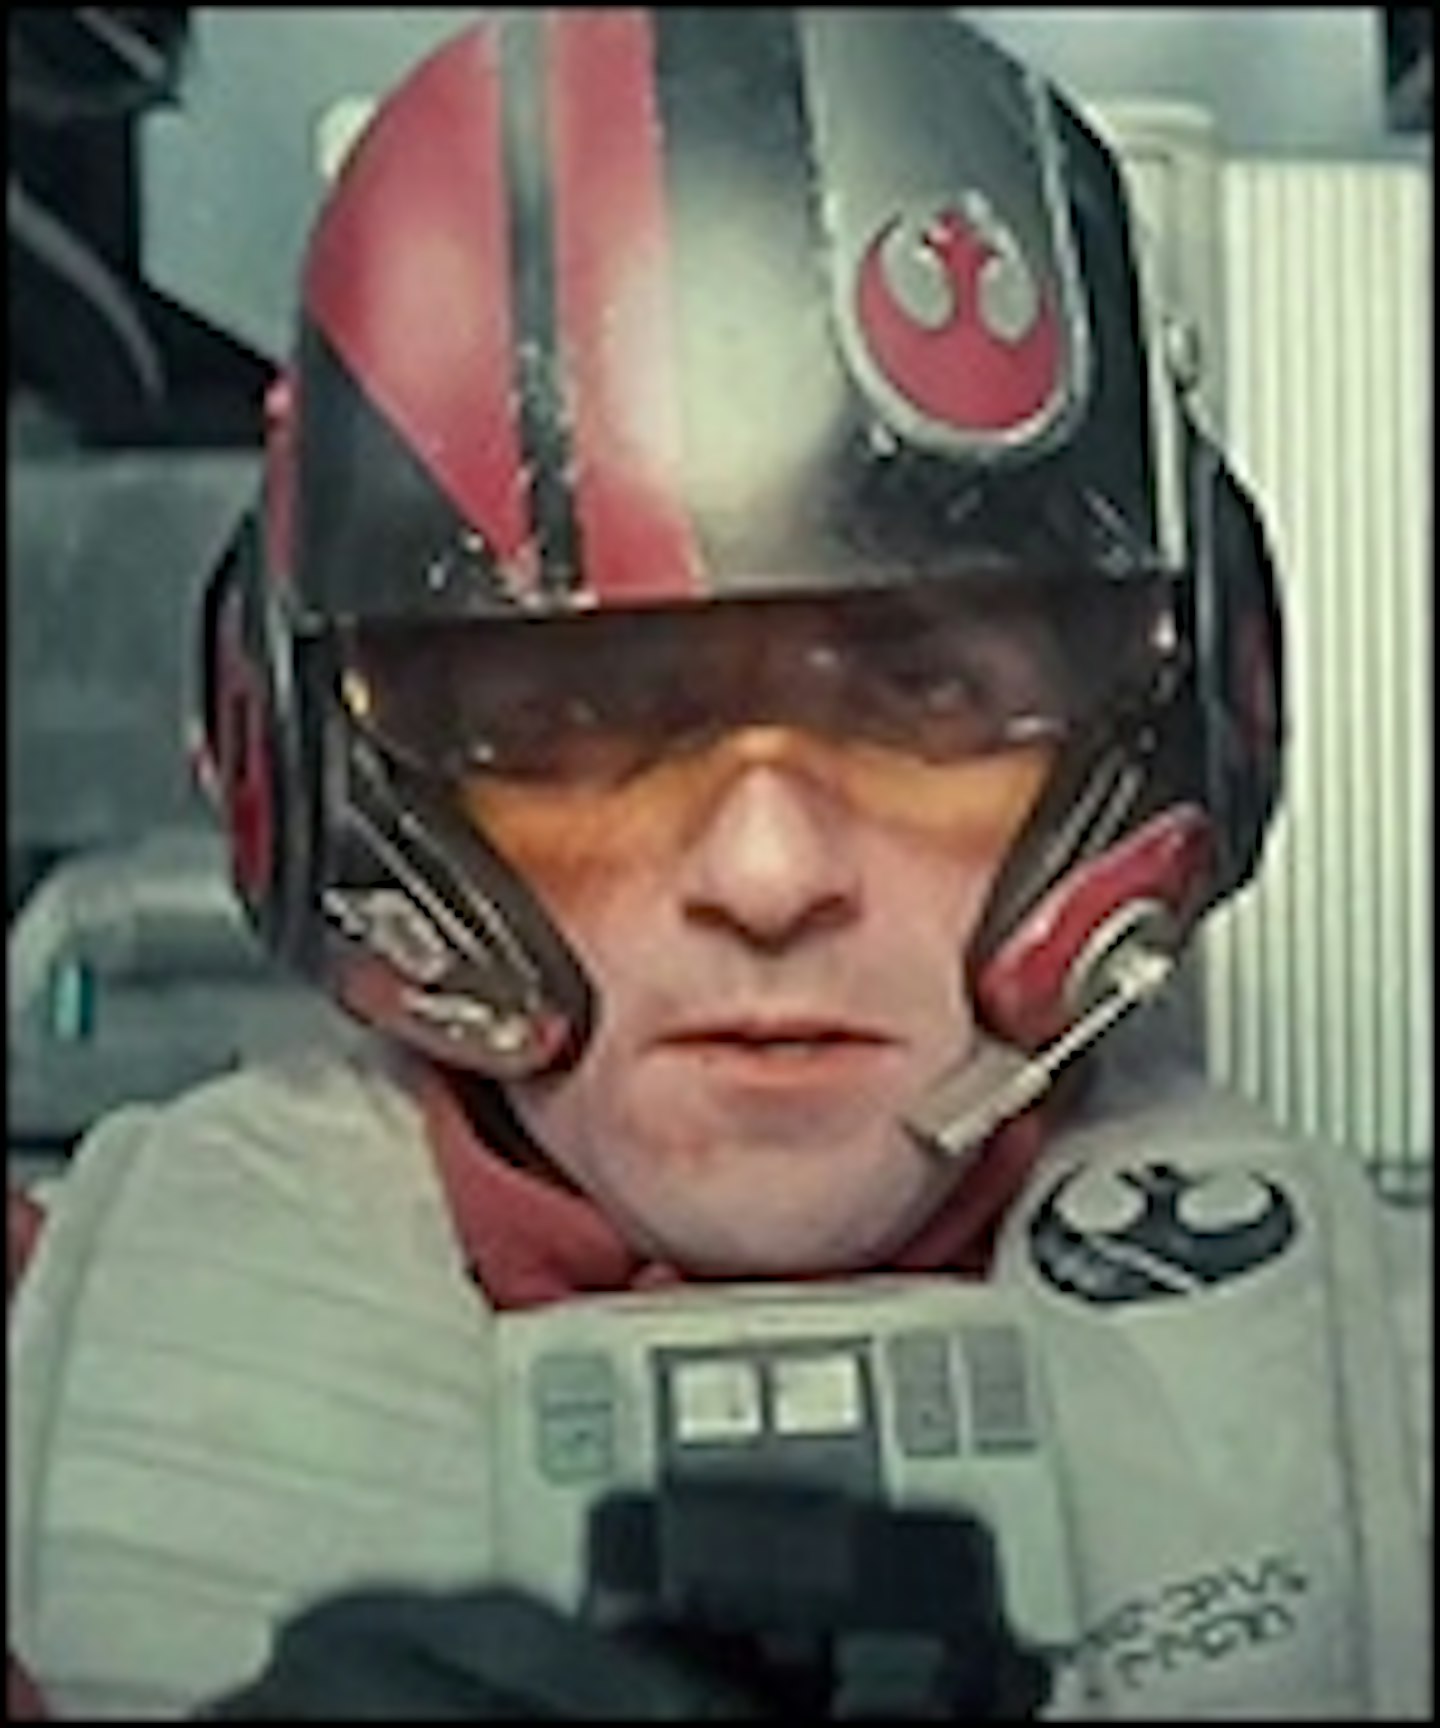 Meet The Star Wars: The Force Awakens Characters